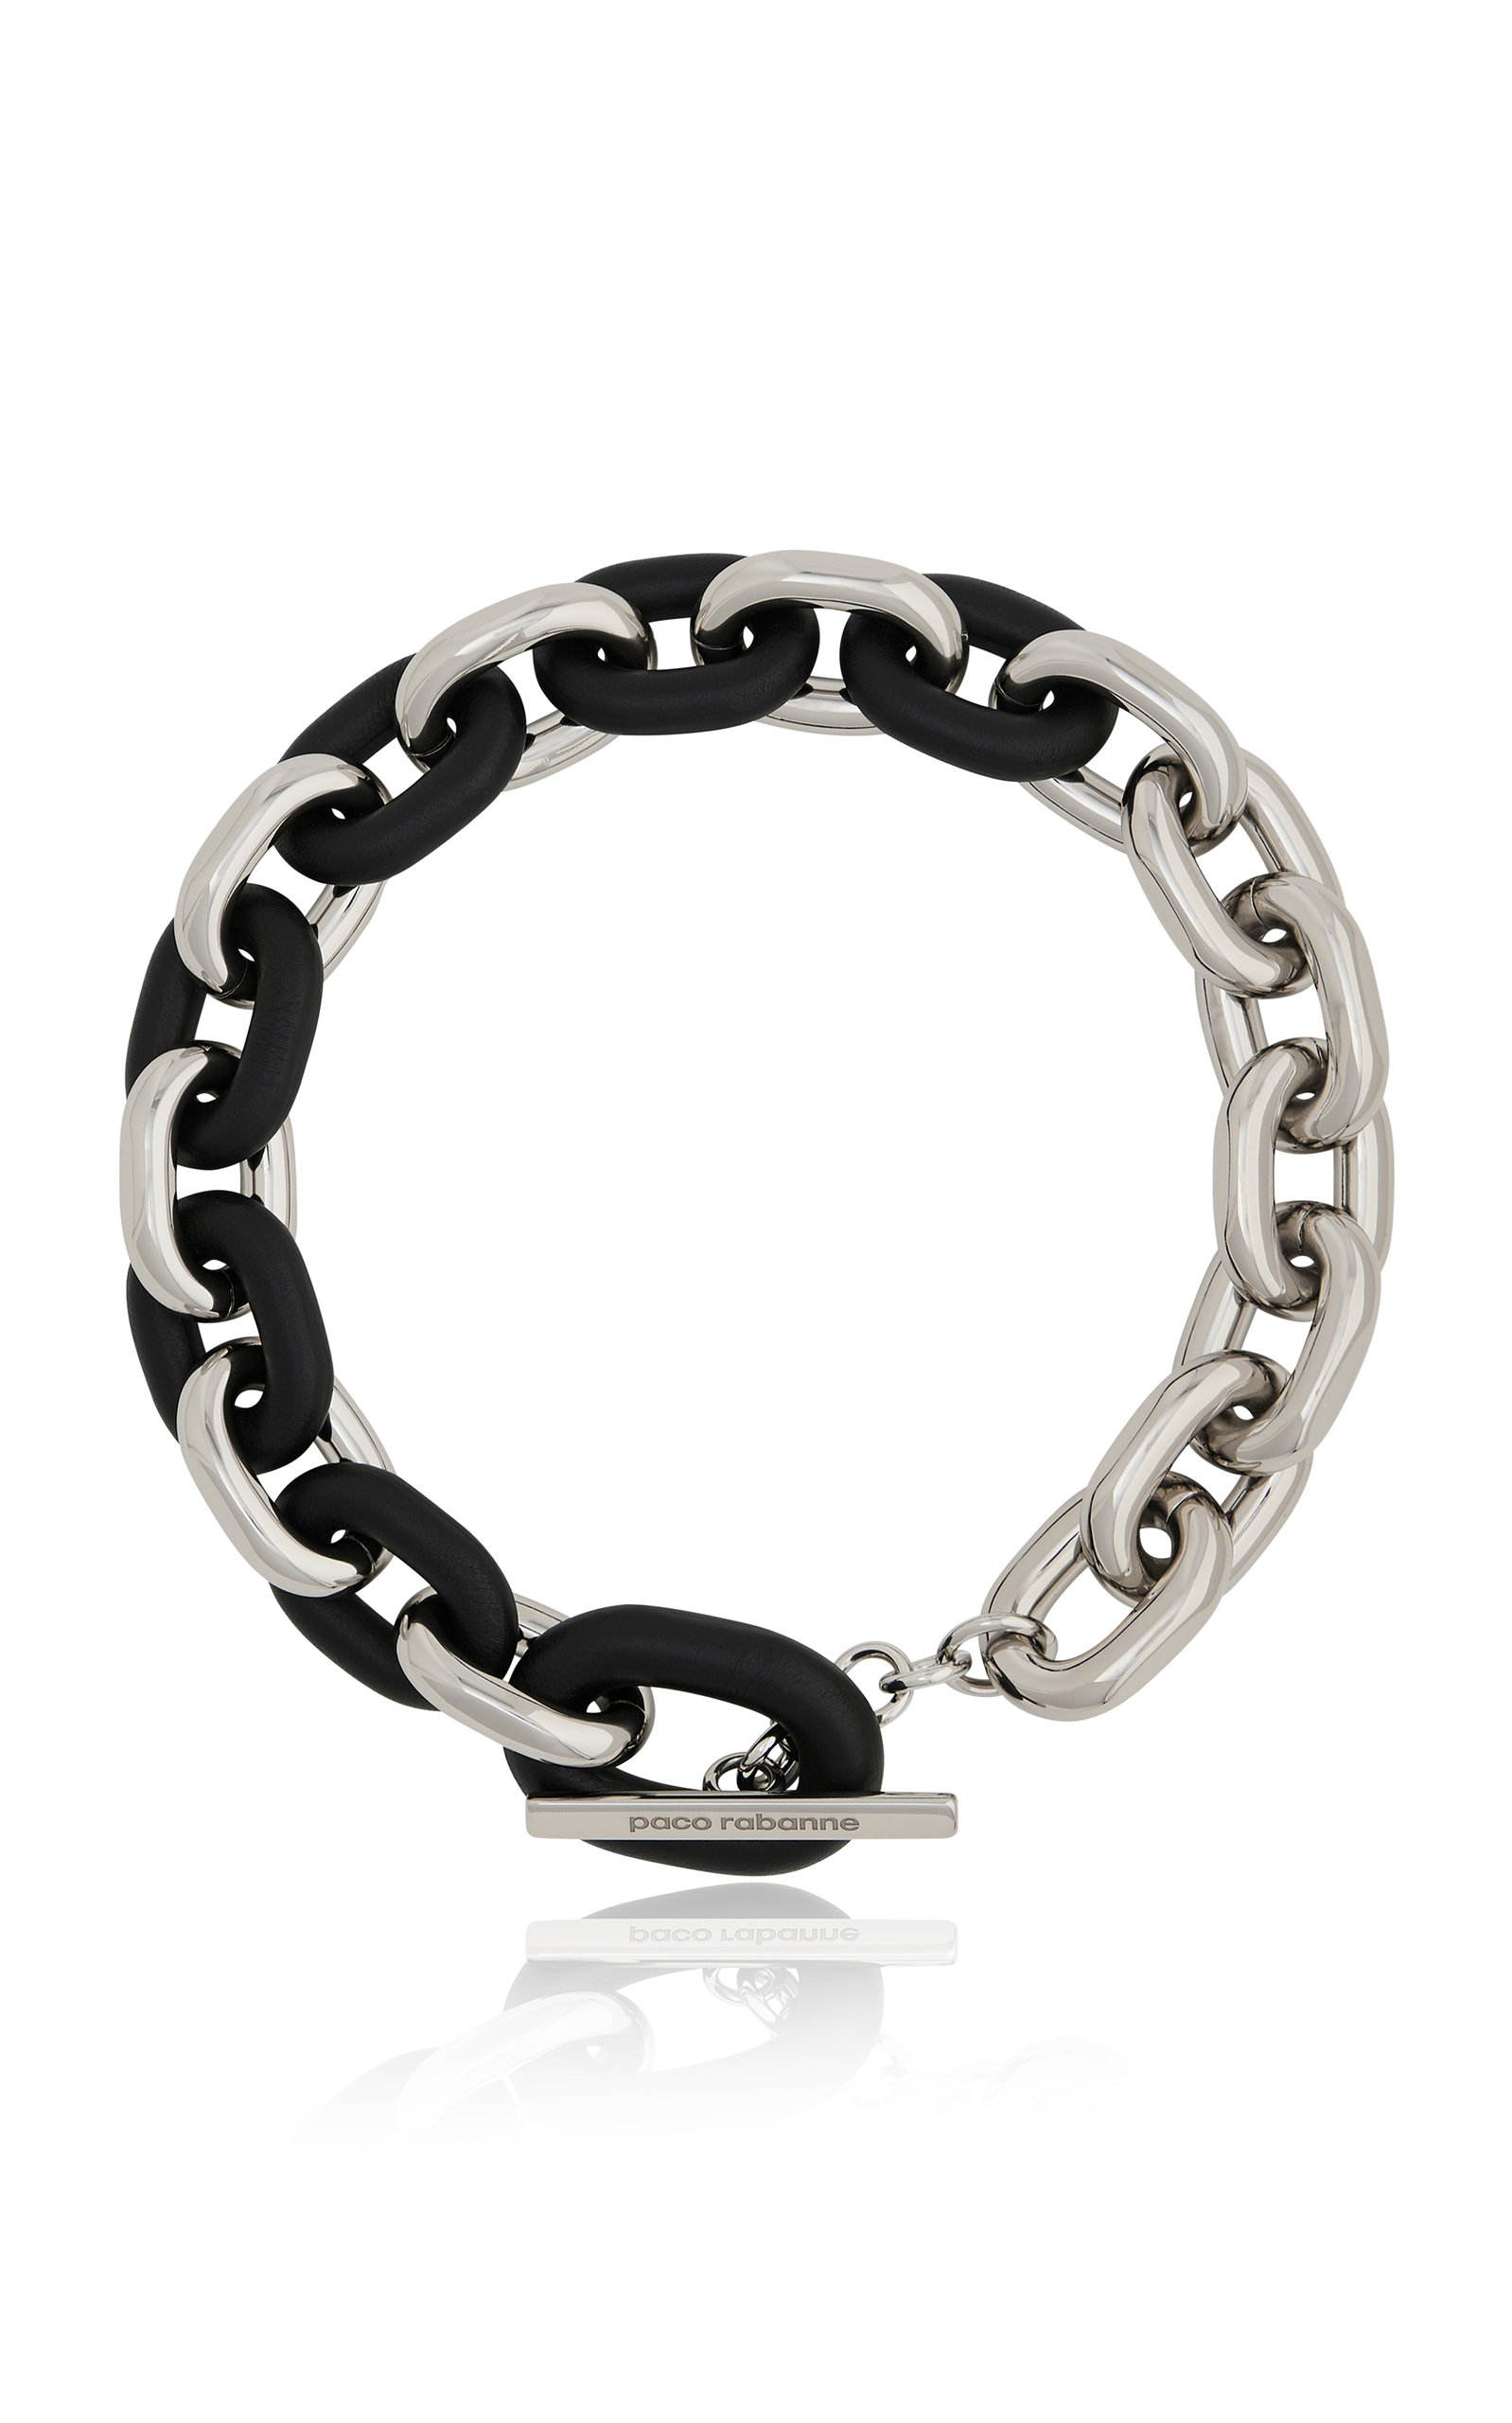 Paco Rabanne - Women's XL Link Aluminum & Leather Necklace - Black - Only At Moda Operandi - Gifts For Her